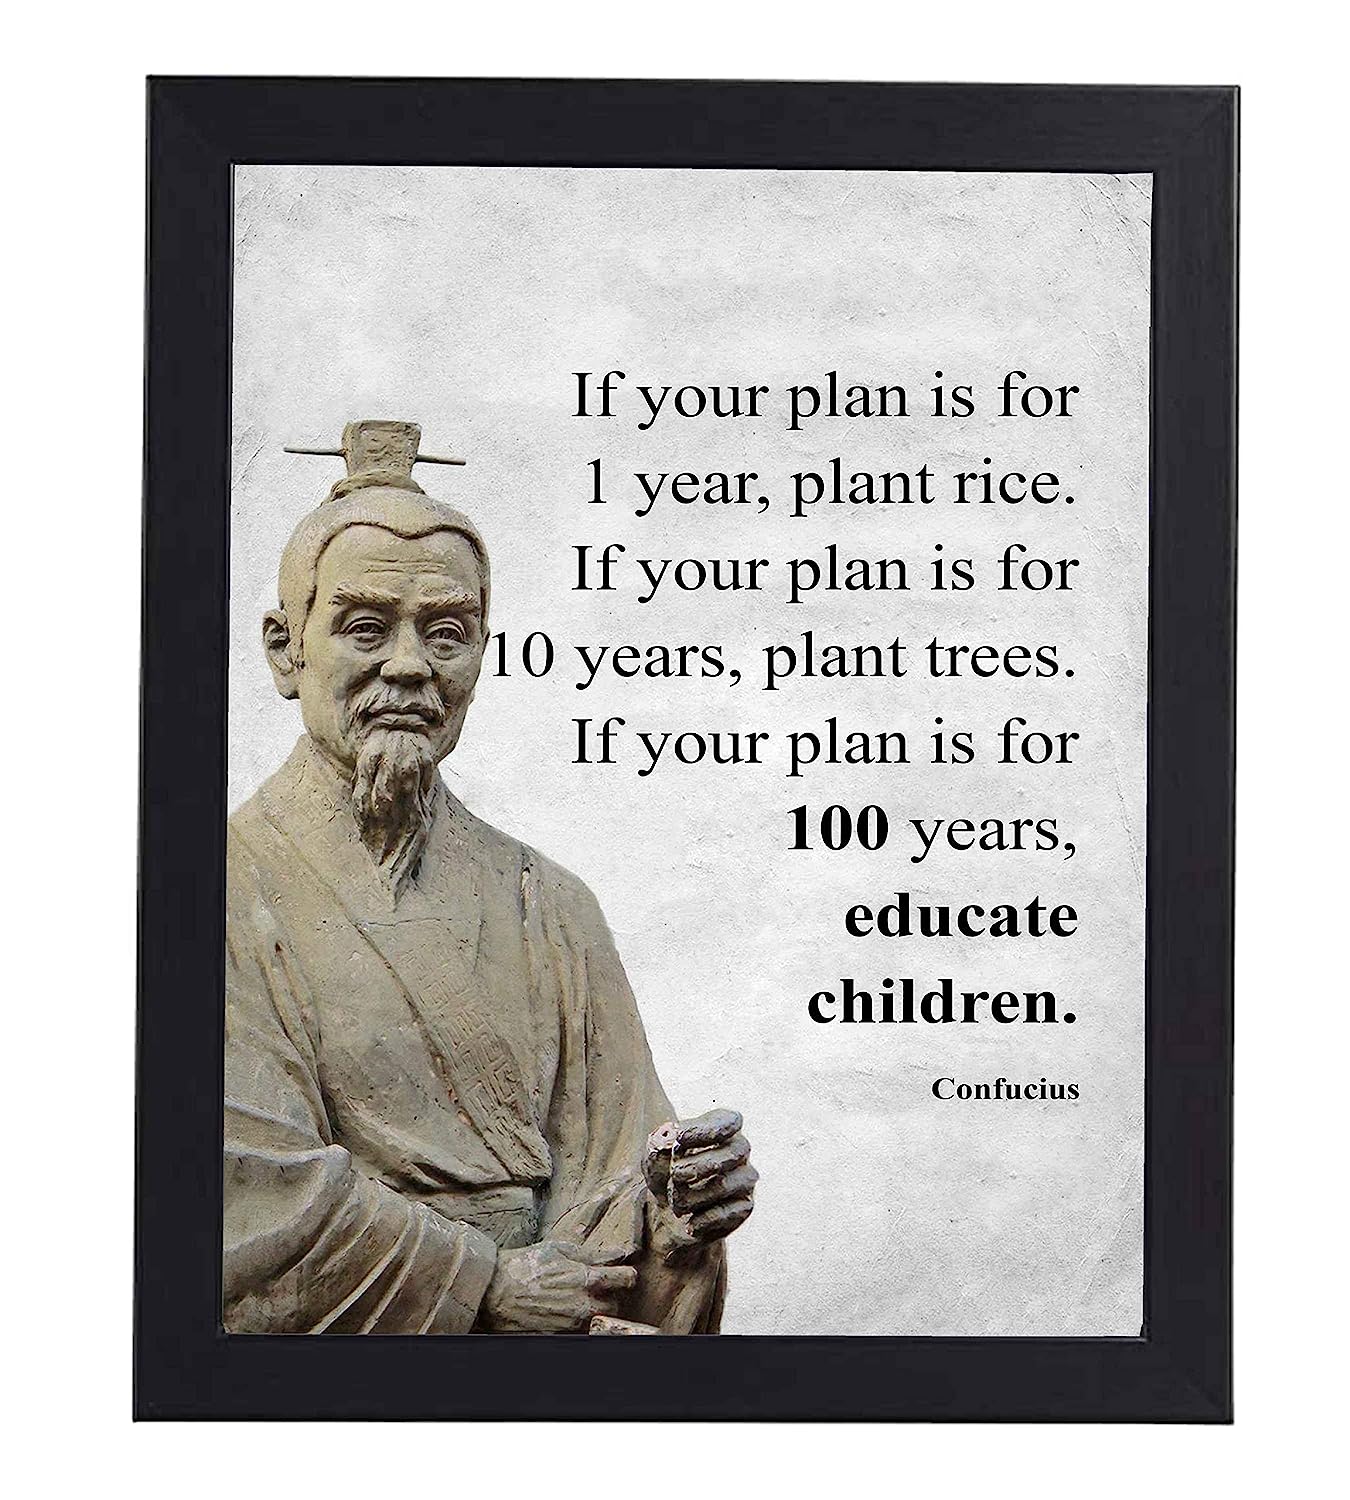 If Your Plan Is For 100 Years-Educate Children Confucius Quotes Wall Art -8 x 10" Motivational Poster Print-Ready to Frame. Inspirational Home-Office-School-Study Decor. Great Gift of Motivation!